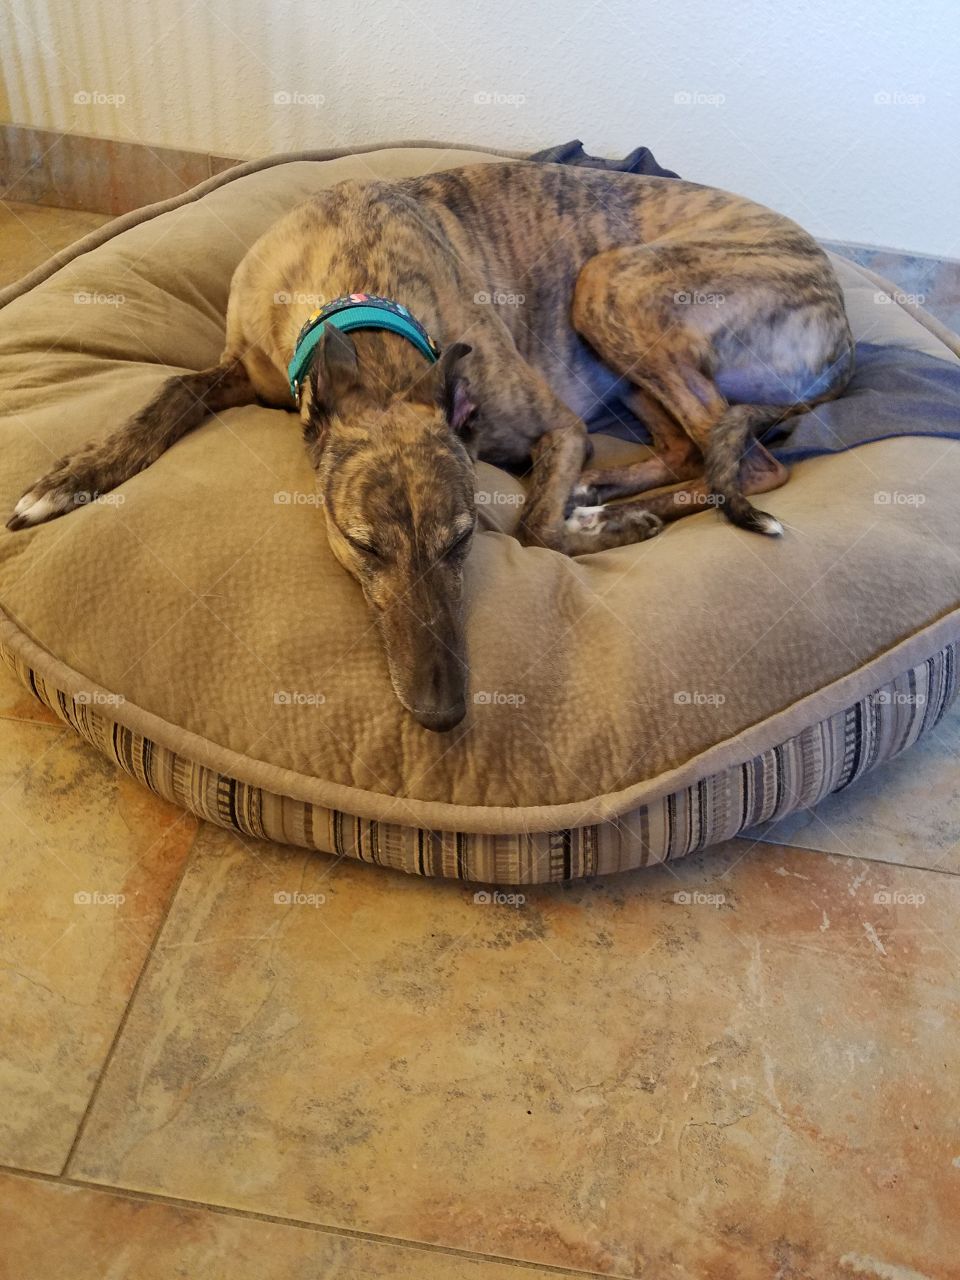 Greyhound relaxing in a comfortable bed with his eyes closed.